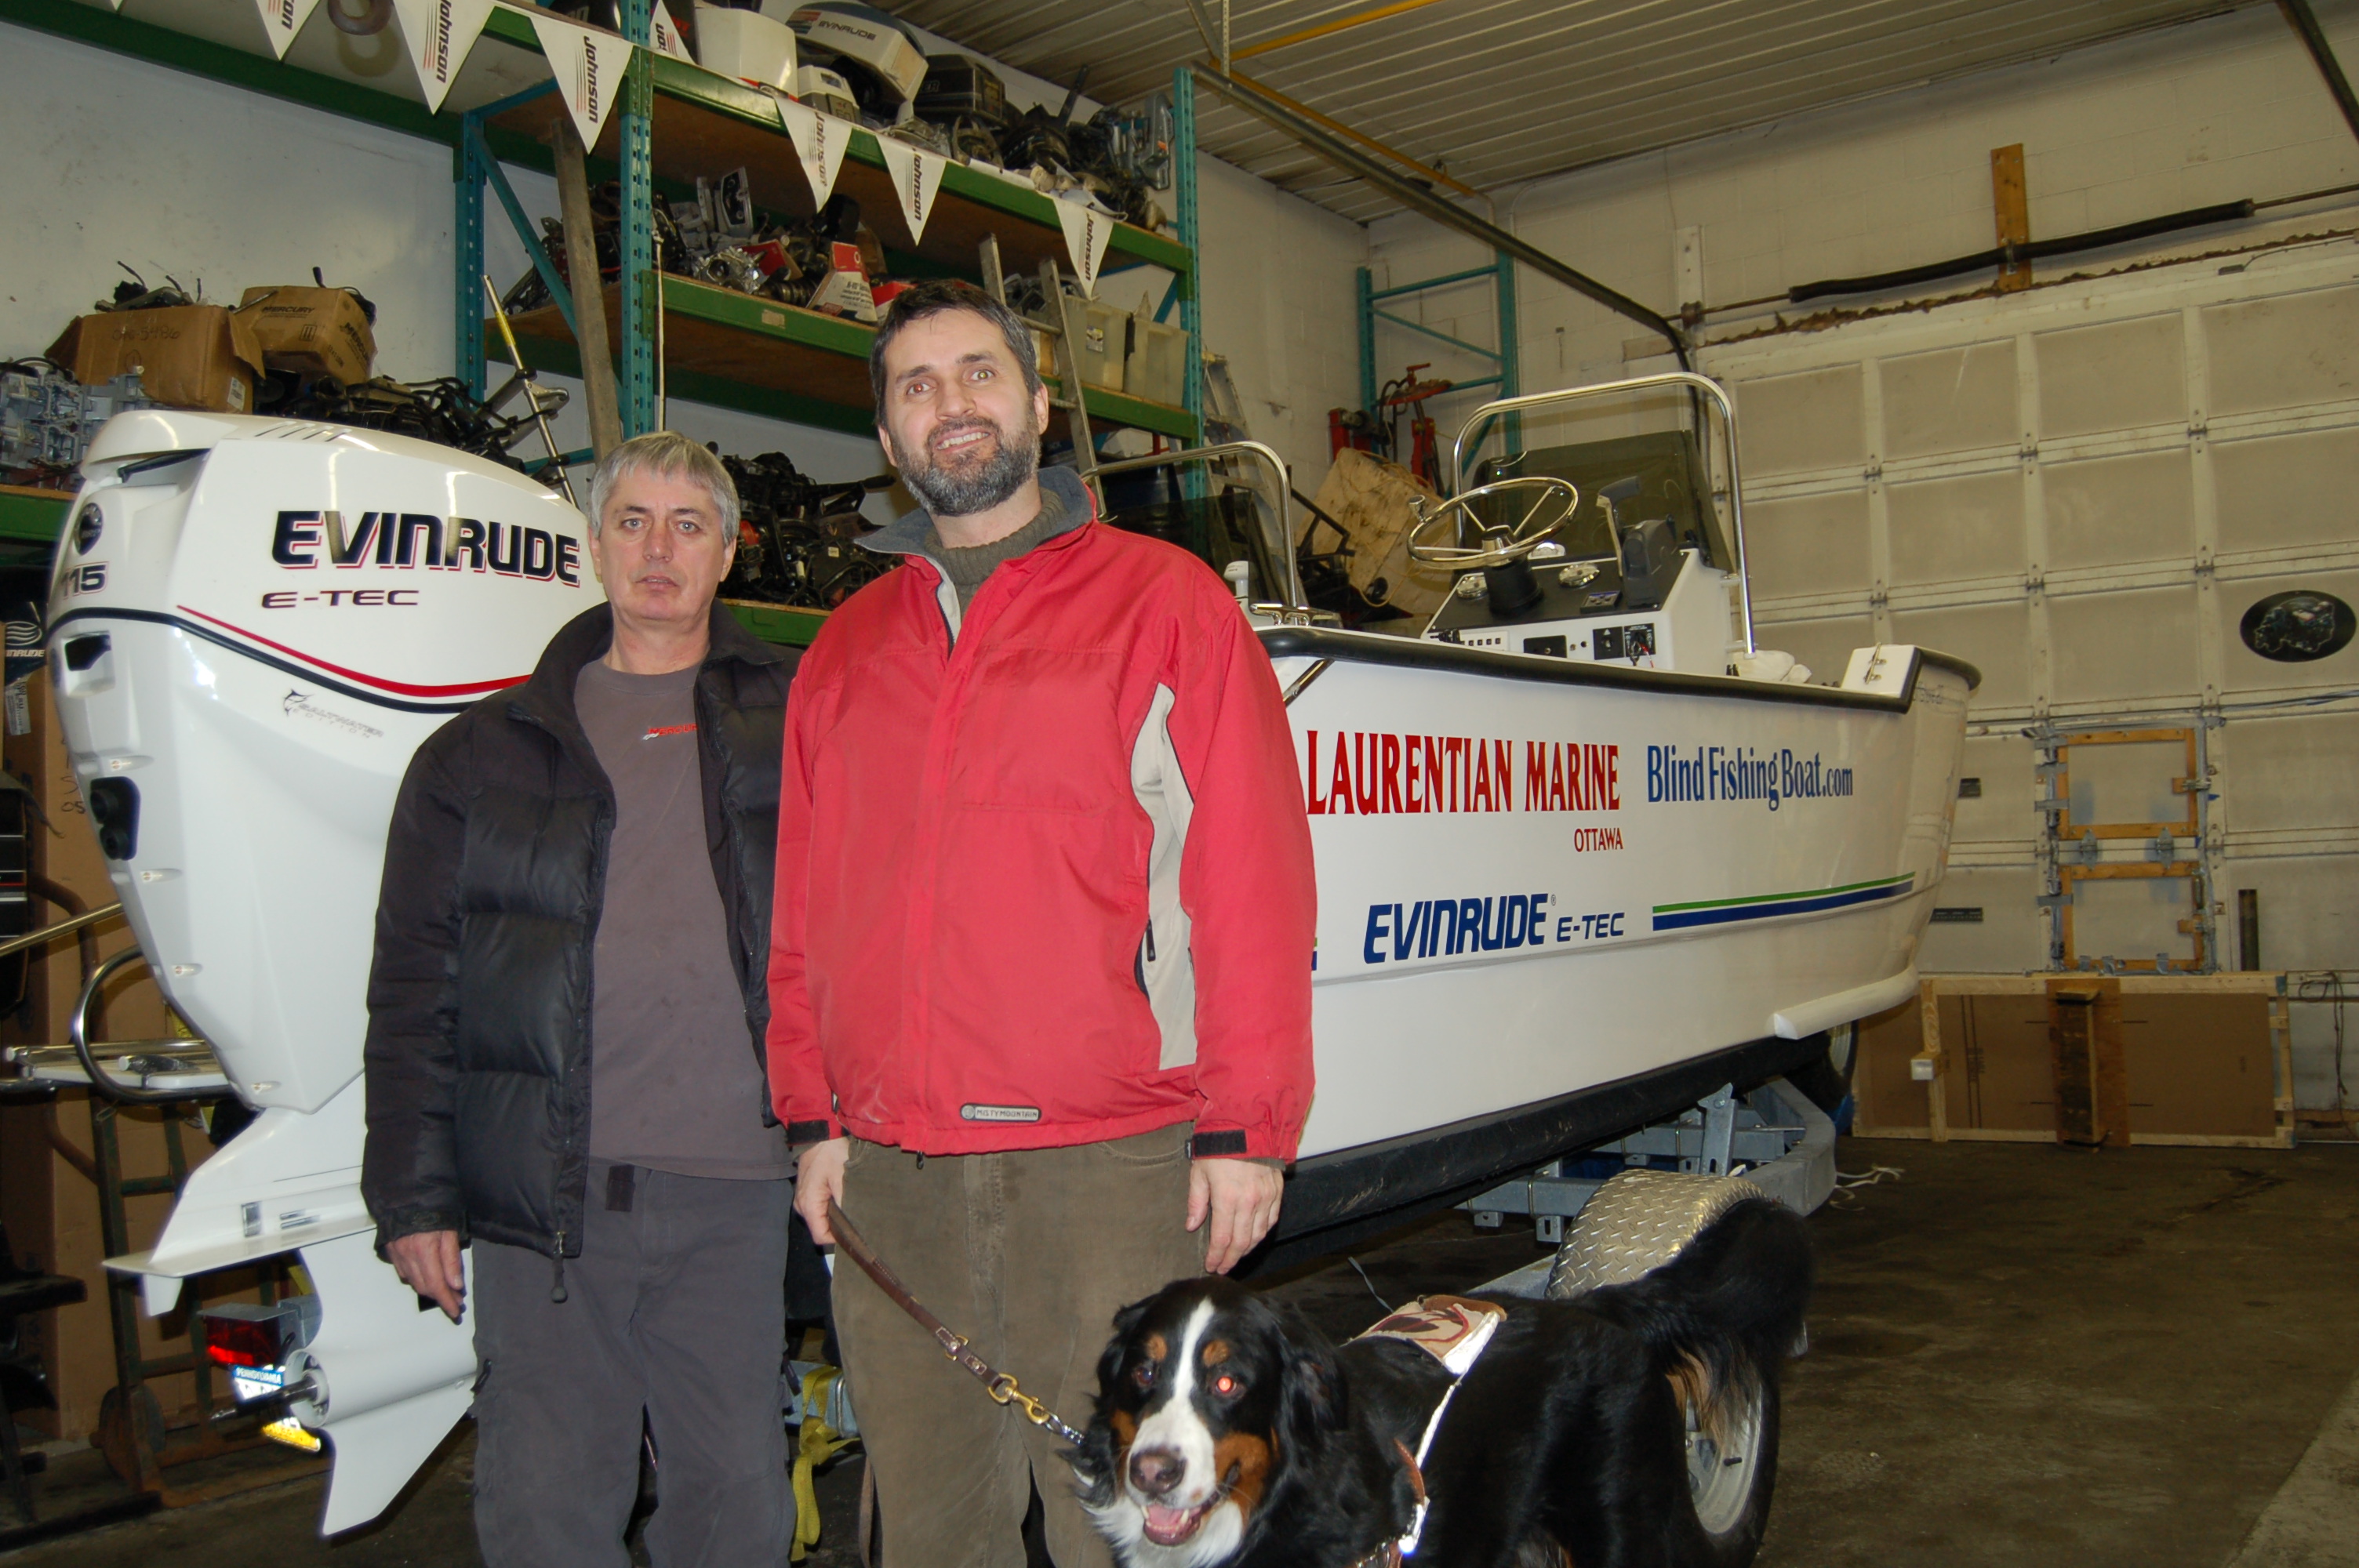 Laurentian Marine owner Alfred McDonald standing next to Lawrence and Meastro